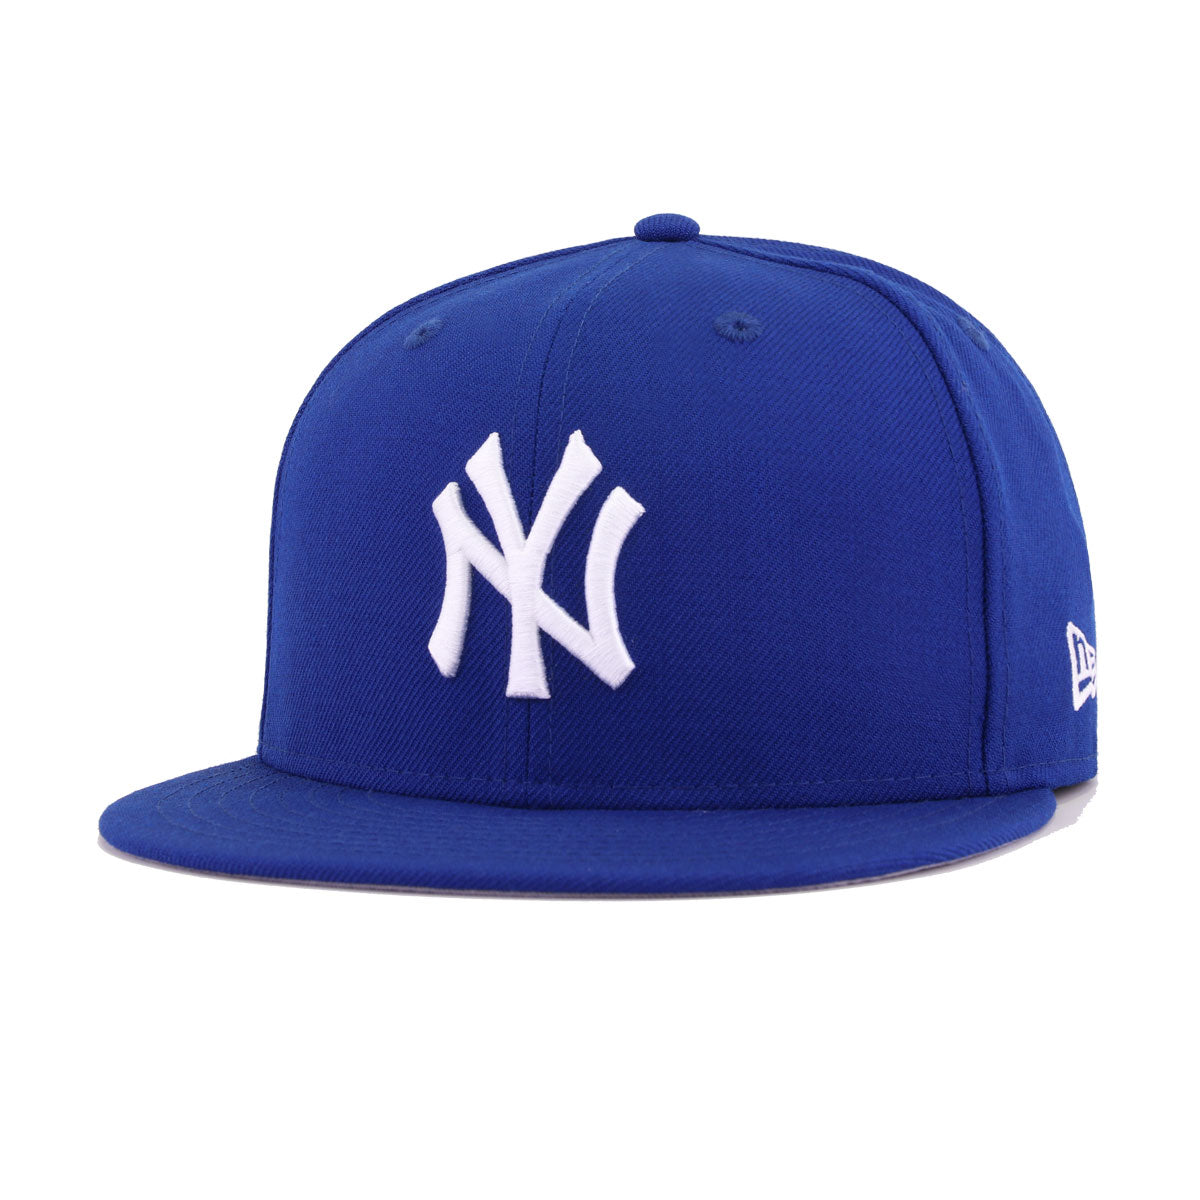 Mevrouw capsule ze New York Yankees Light Royal Blue New Era 59Fifty Fitted